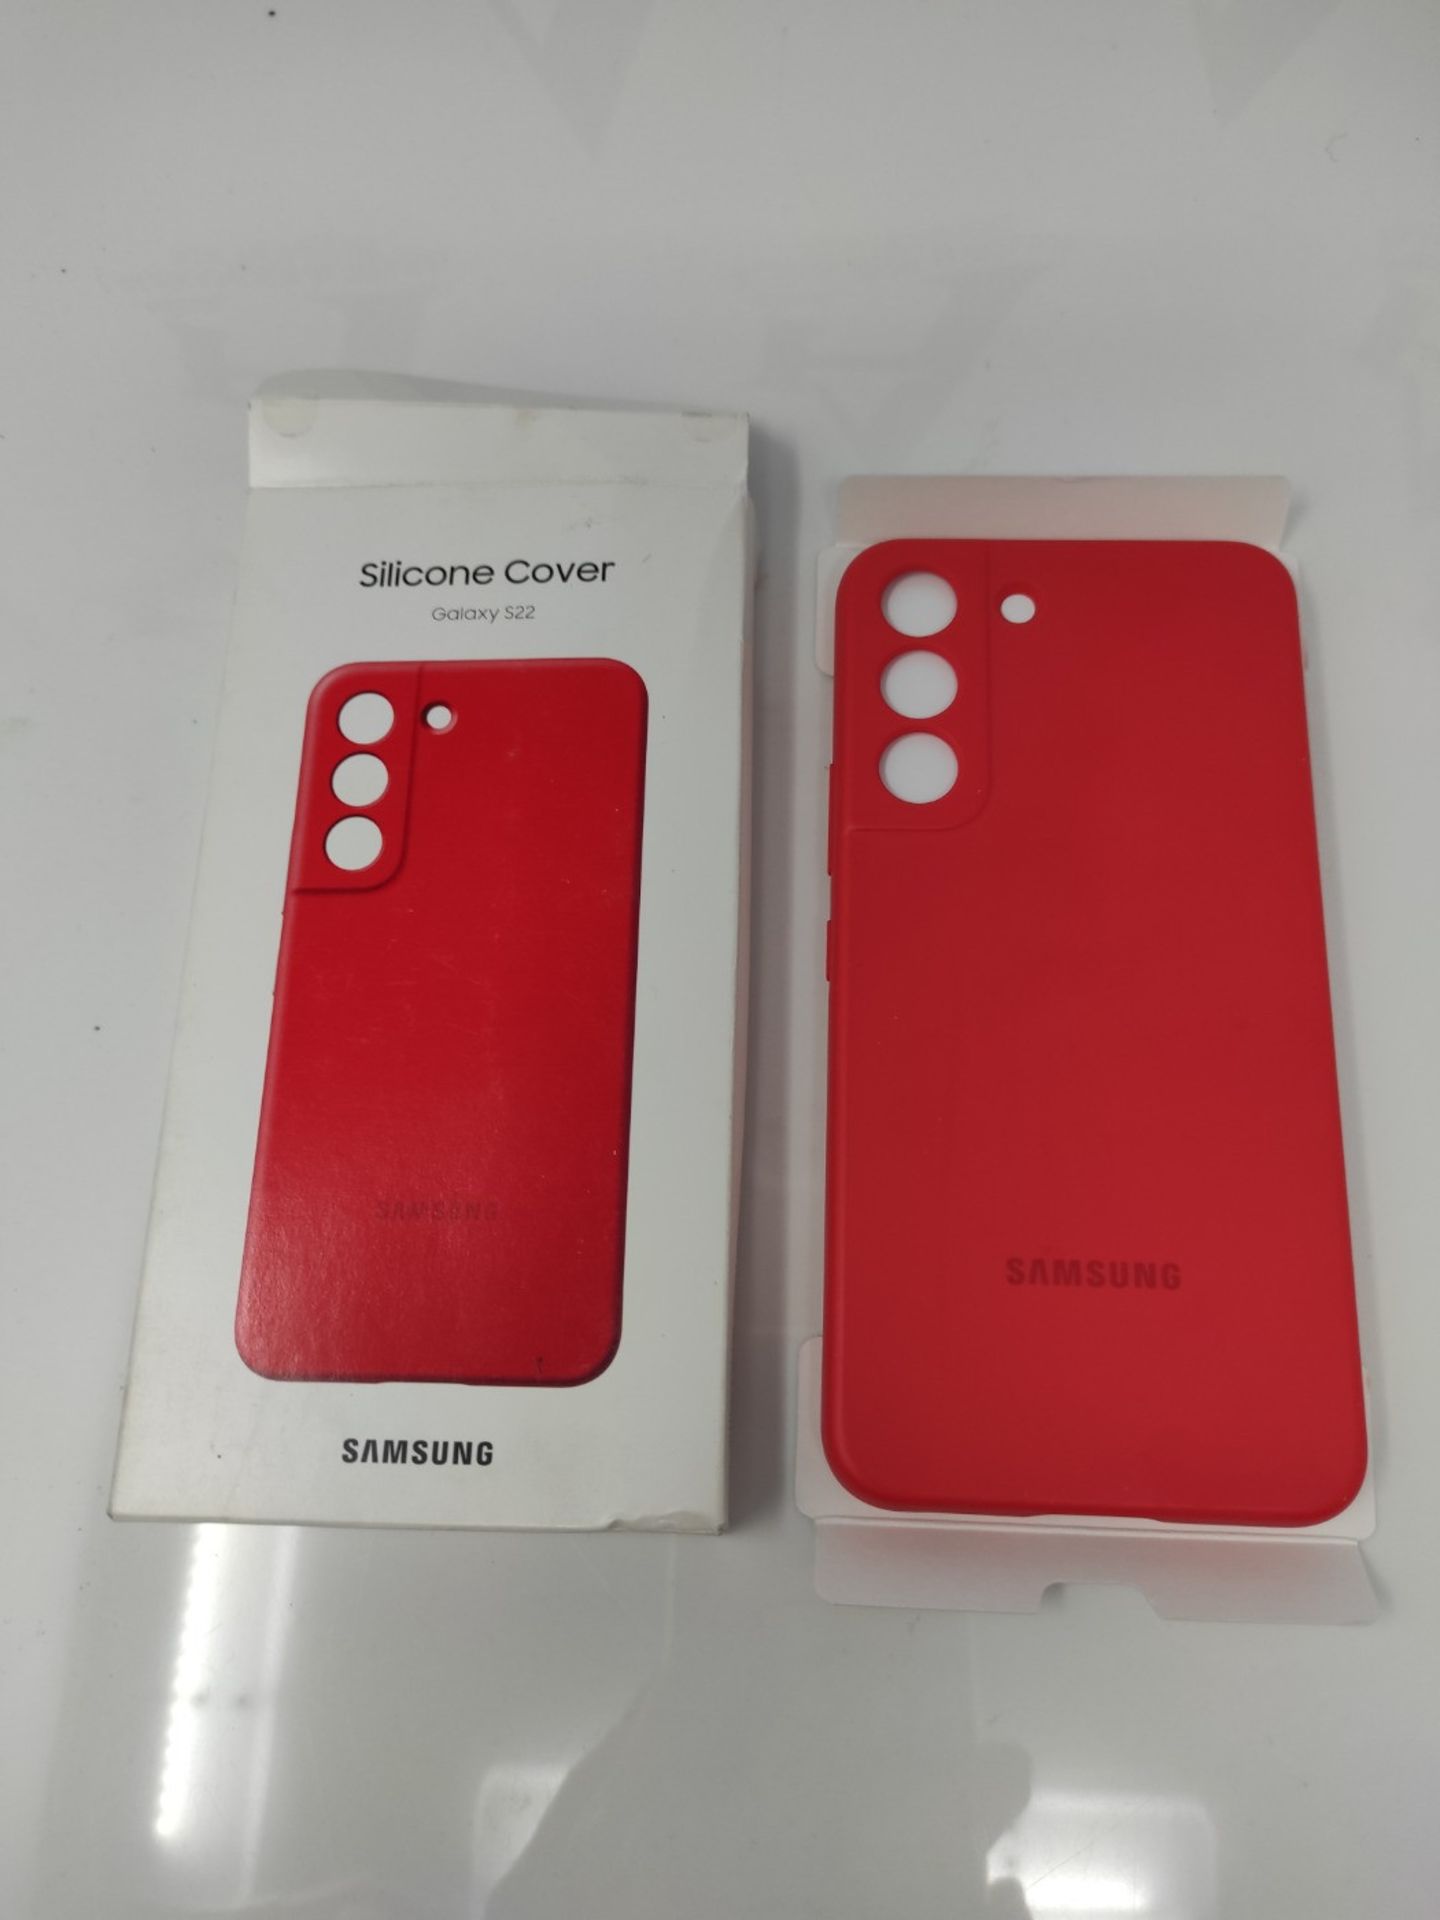 Samsung Official S22 Silicone Cover Coral - Image 2 of 2